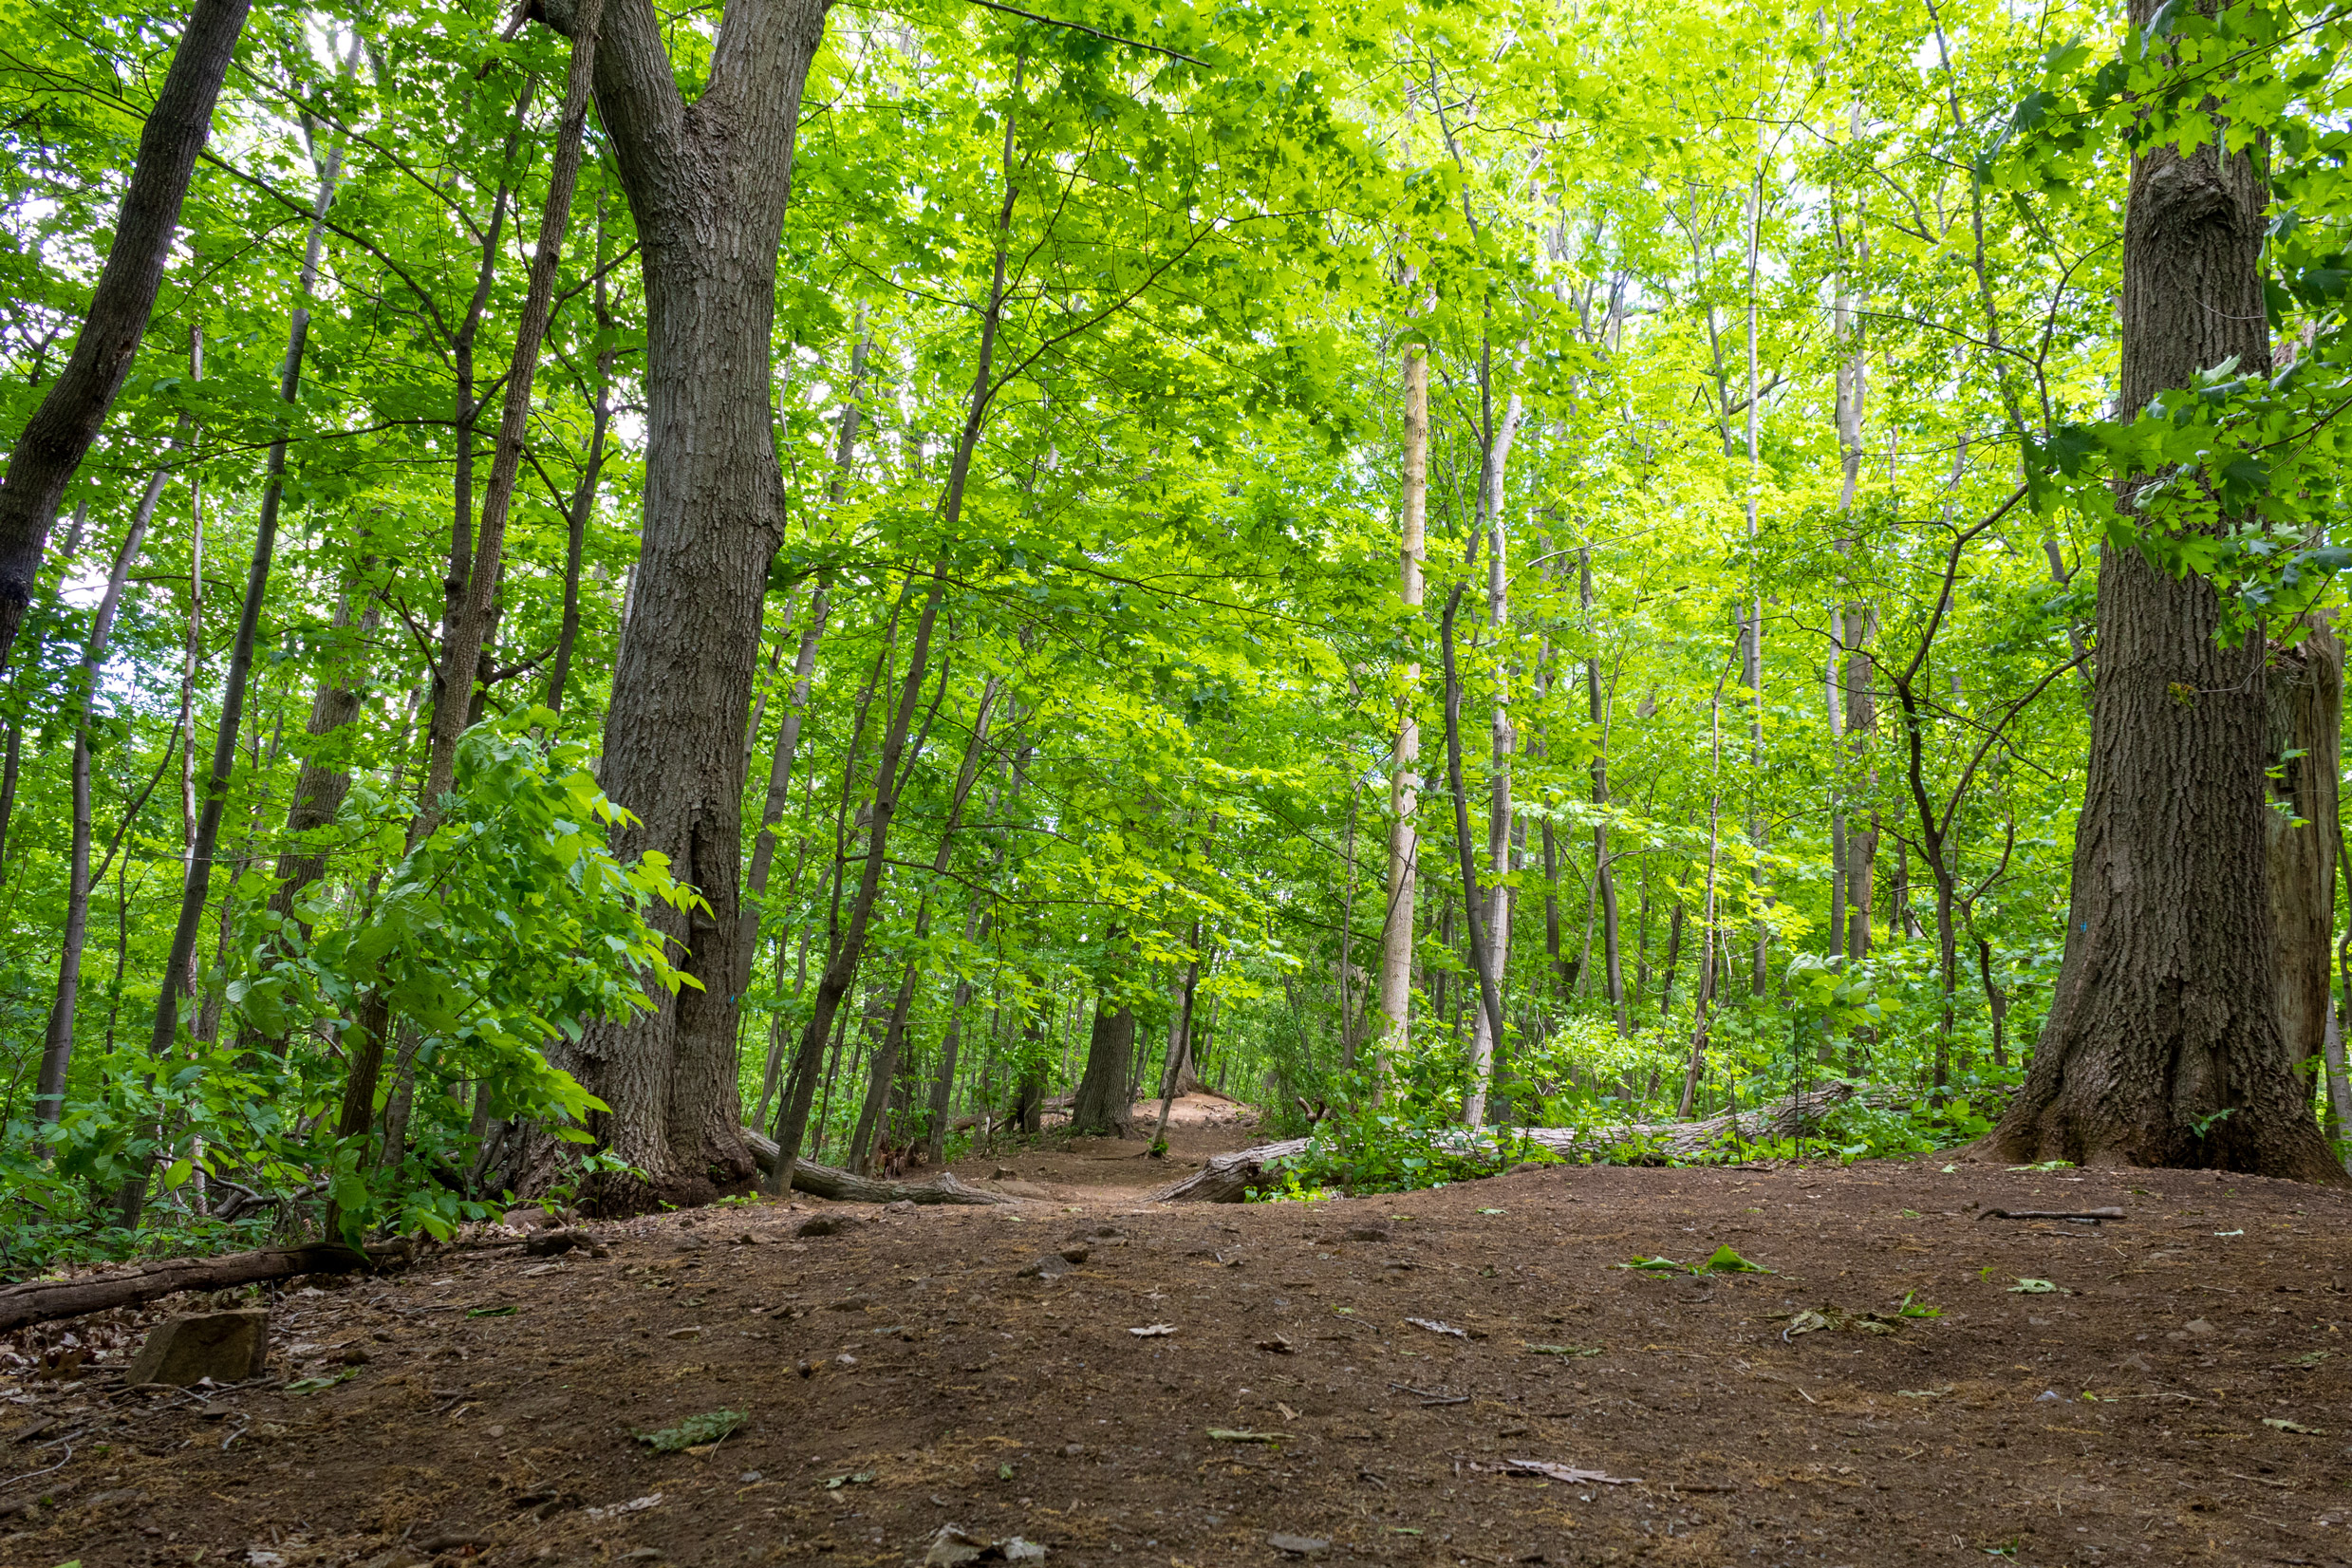 A path in a forest surrounded by green trees